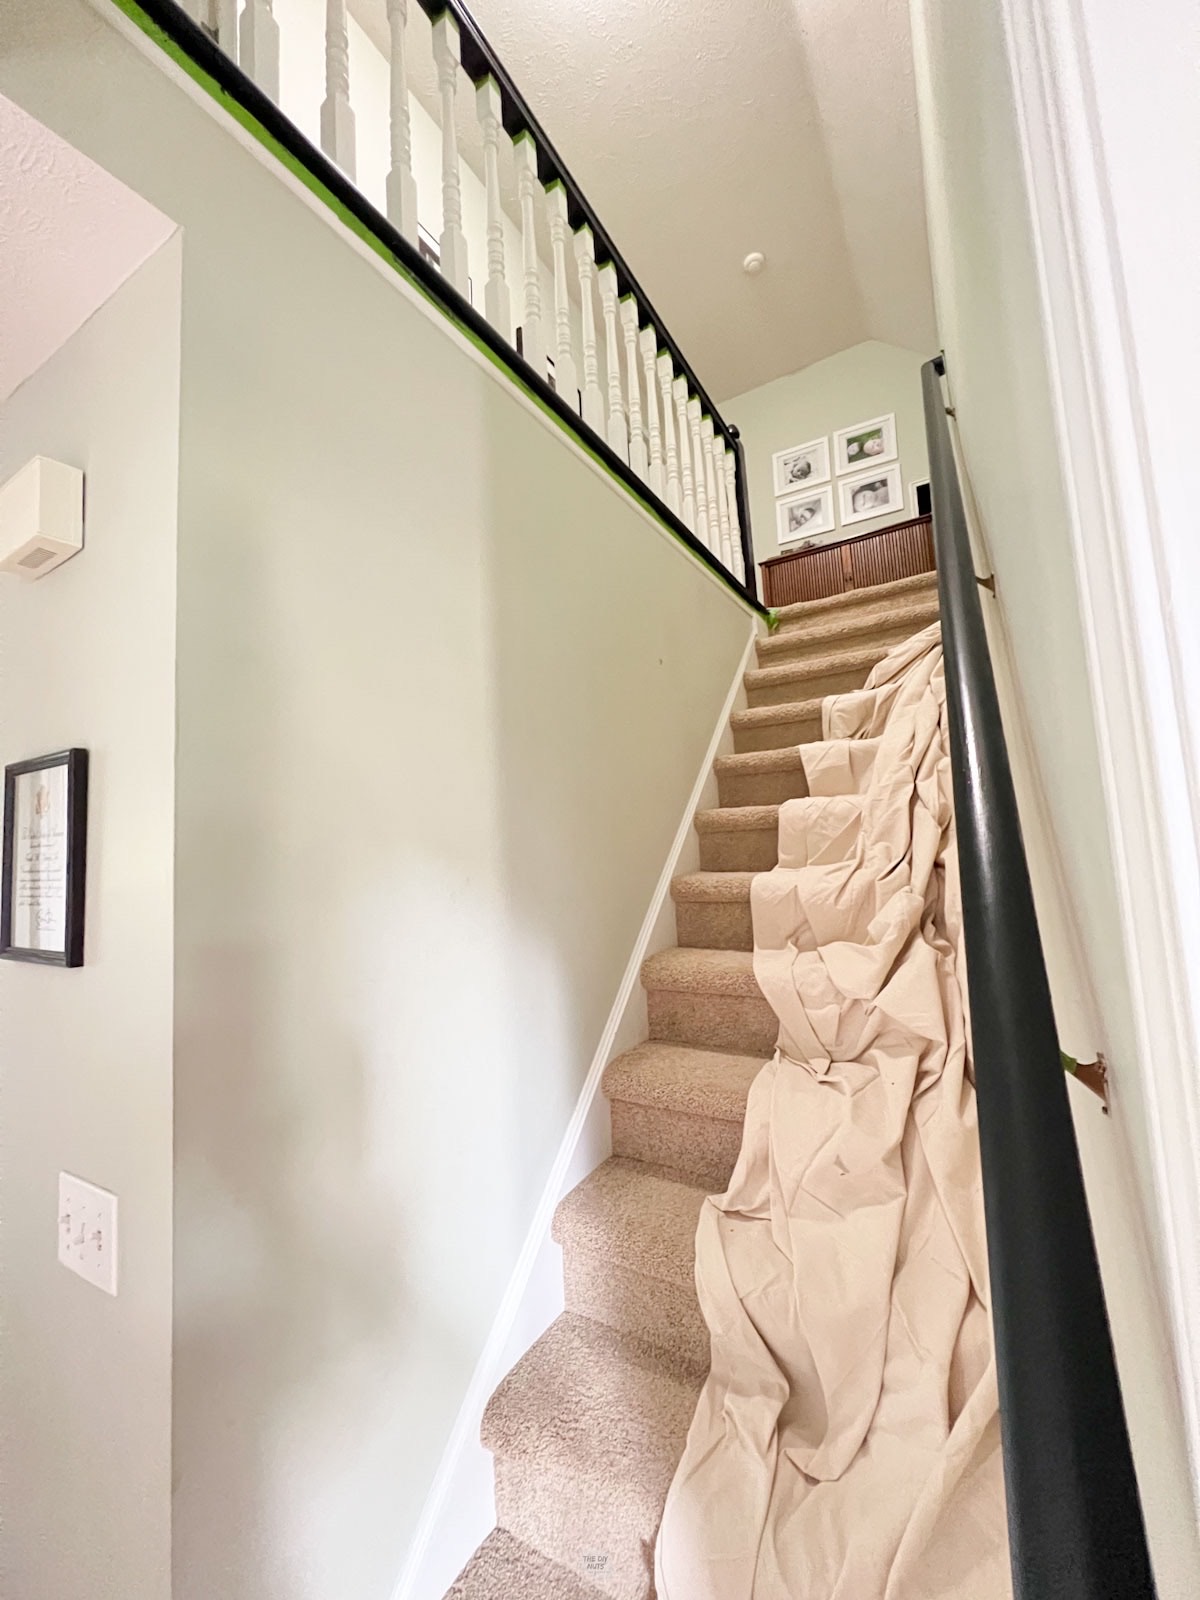 drop cloth on stair railing and handrail painted black and white.